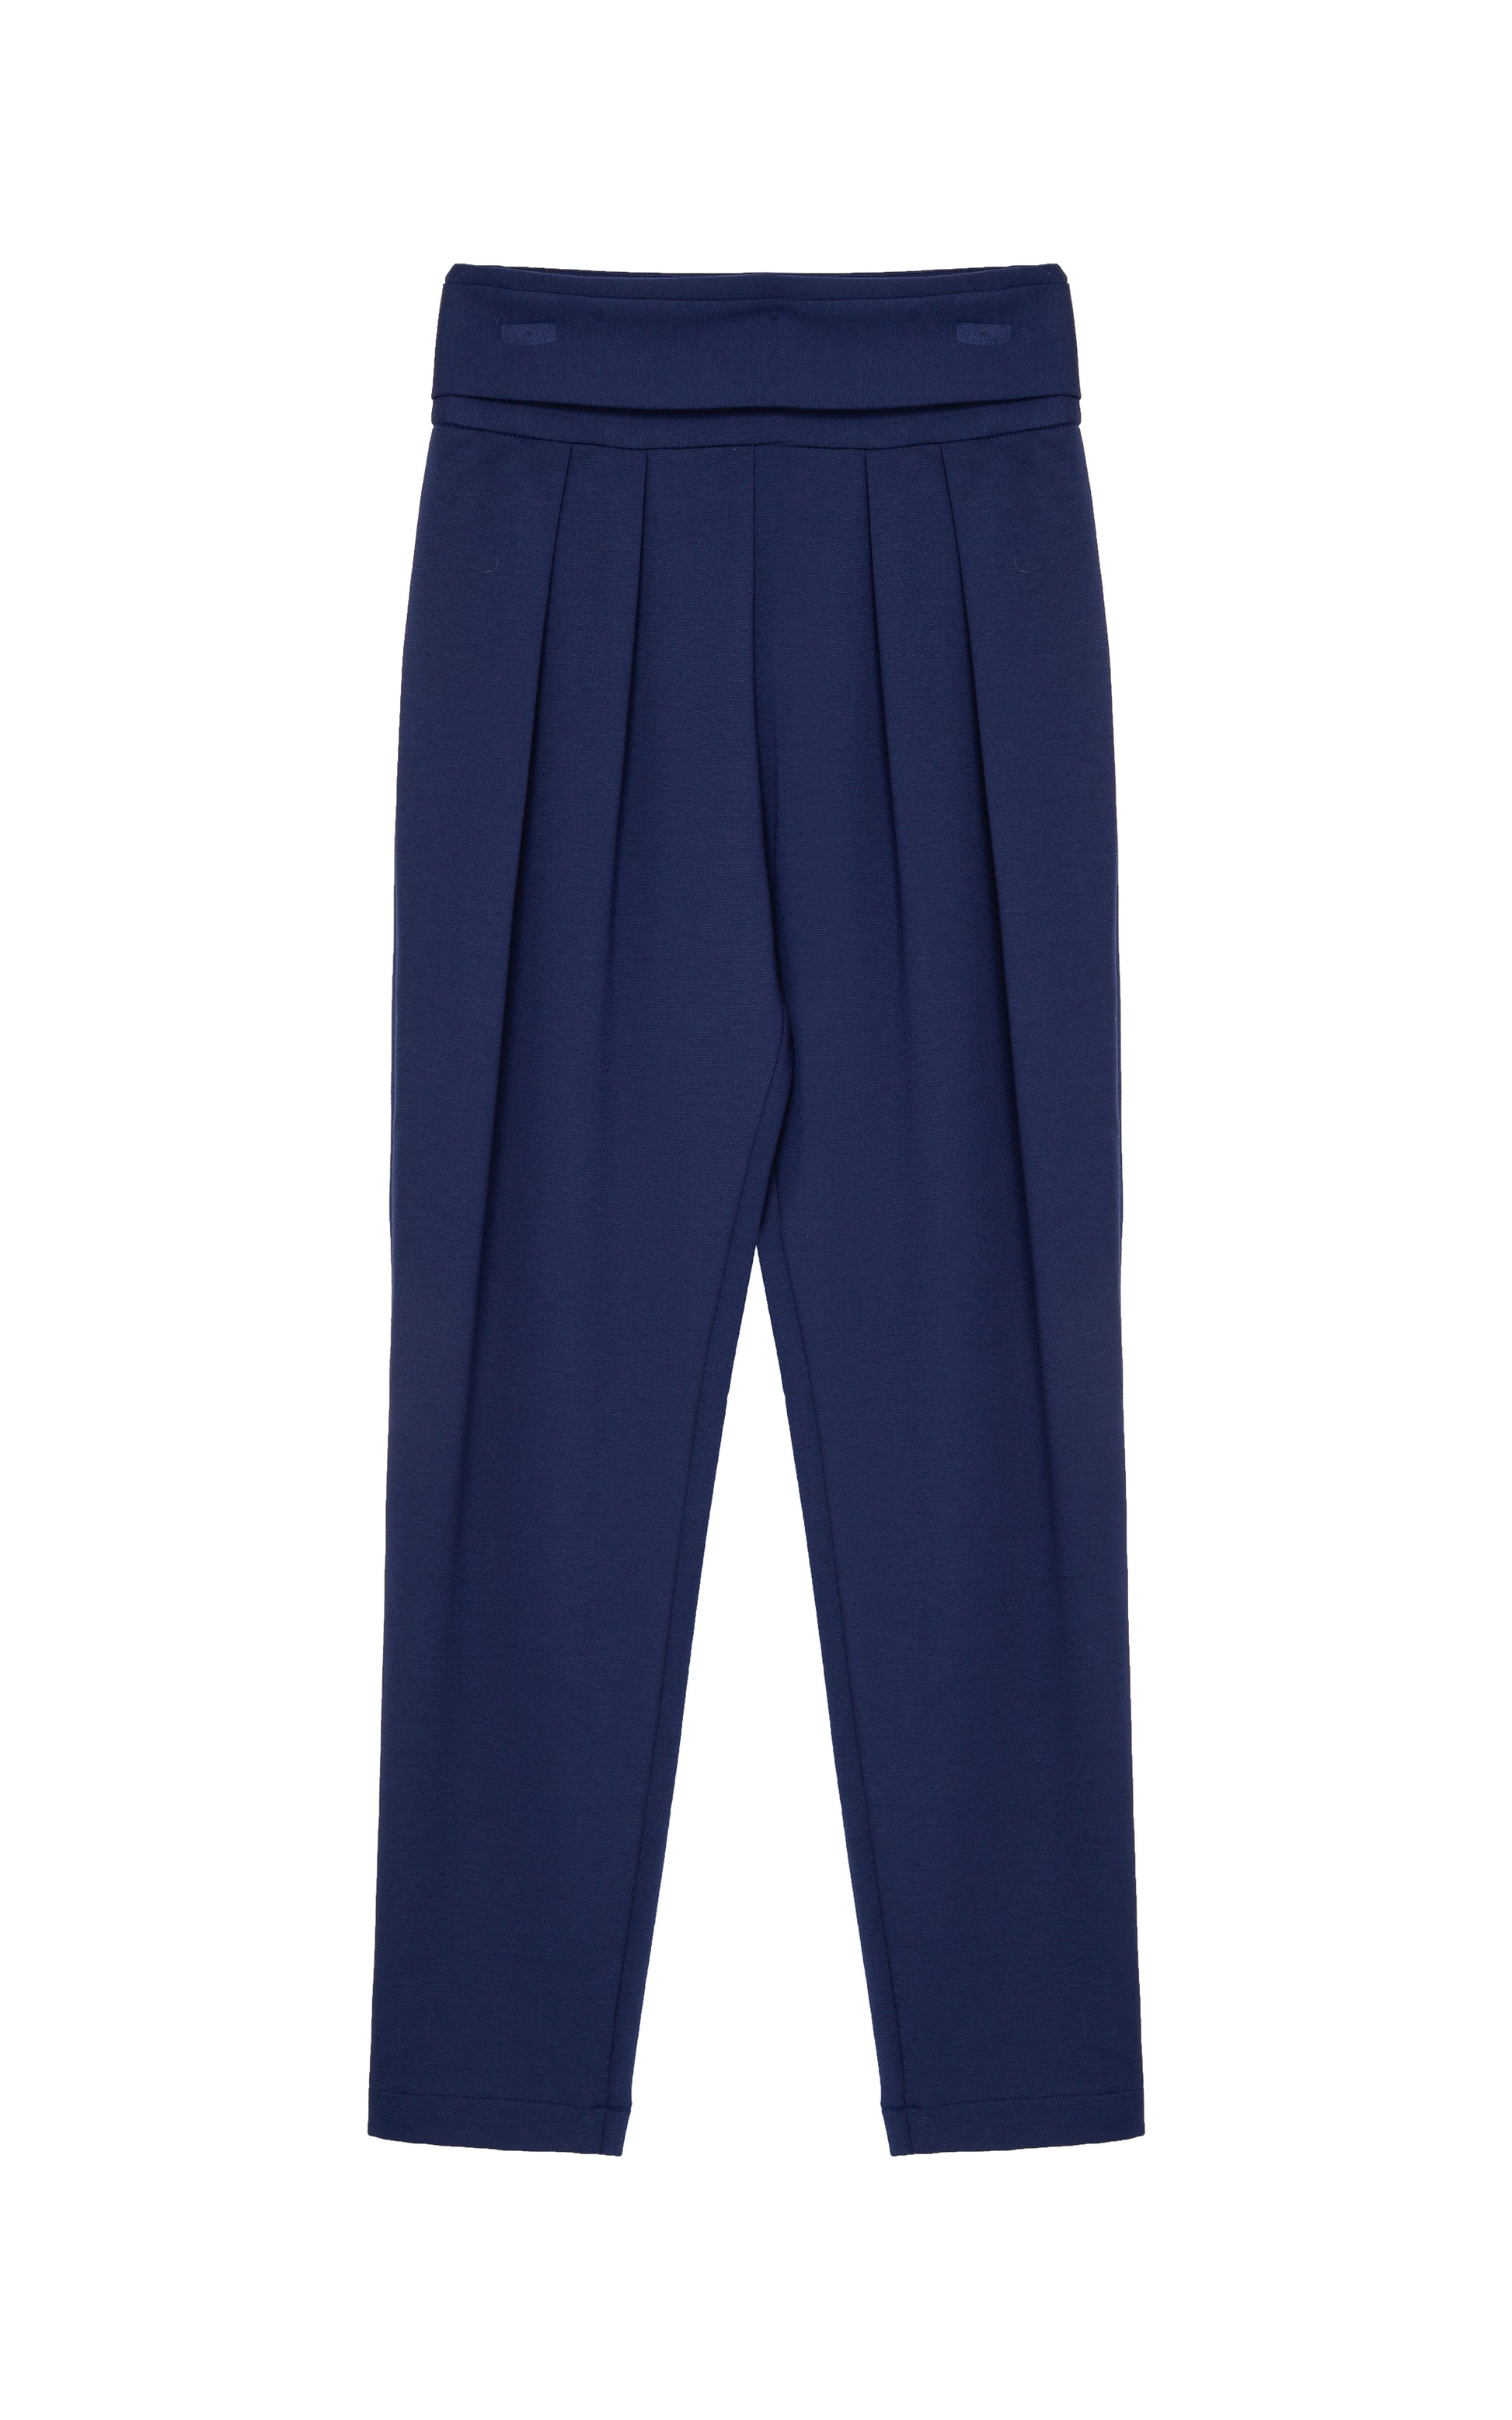 Front view of high-waisted navy fabric pant